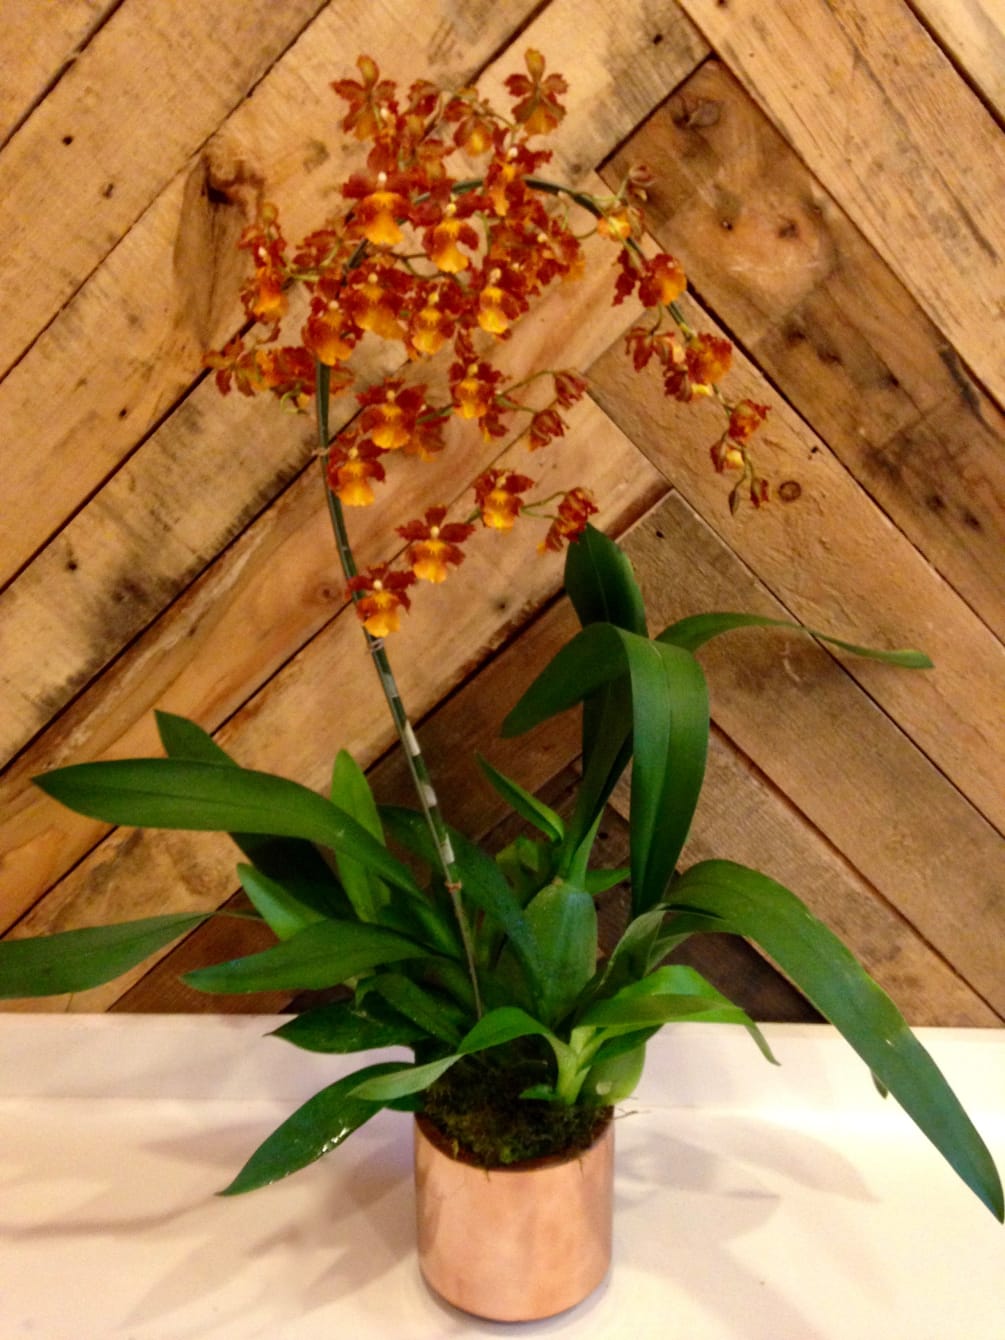 Our Oncidium orchids are potted up in complimenting ceramic and metal containers